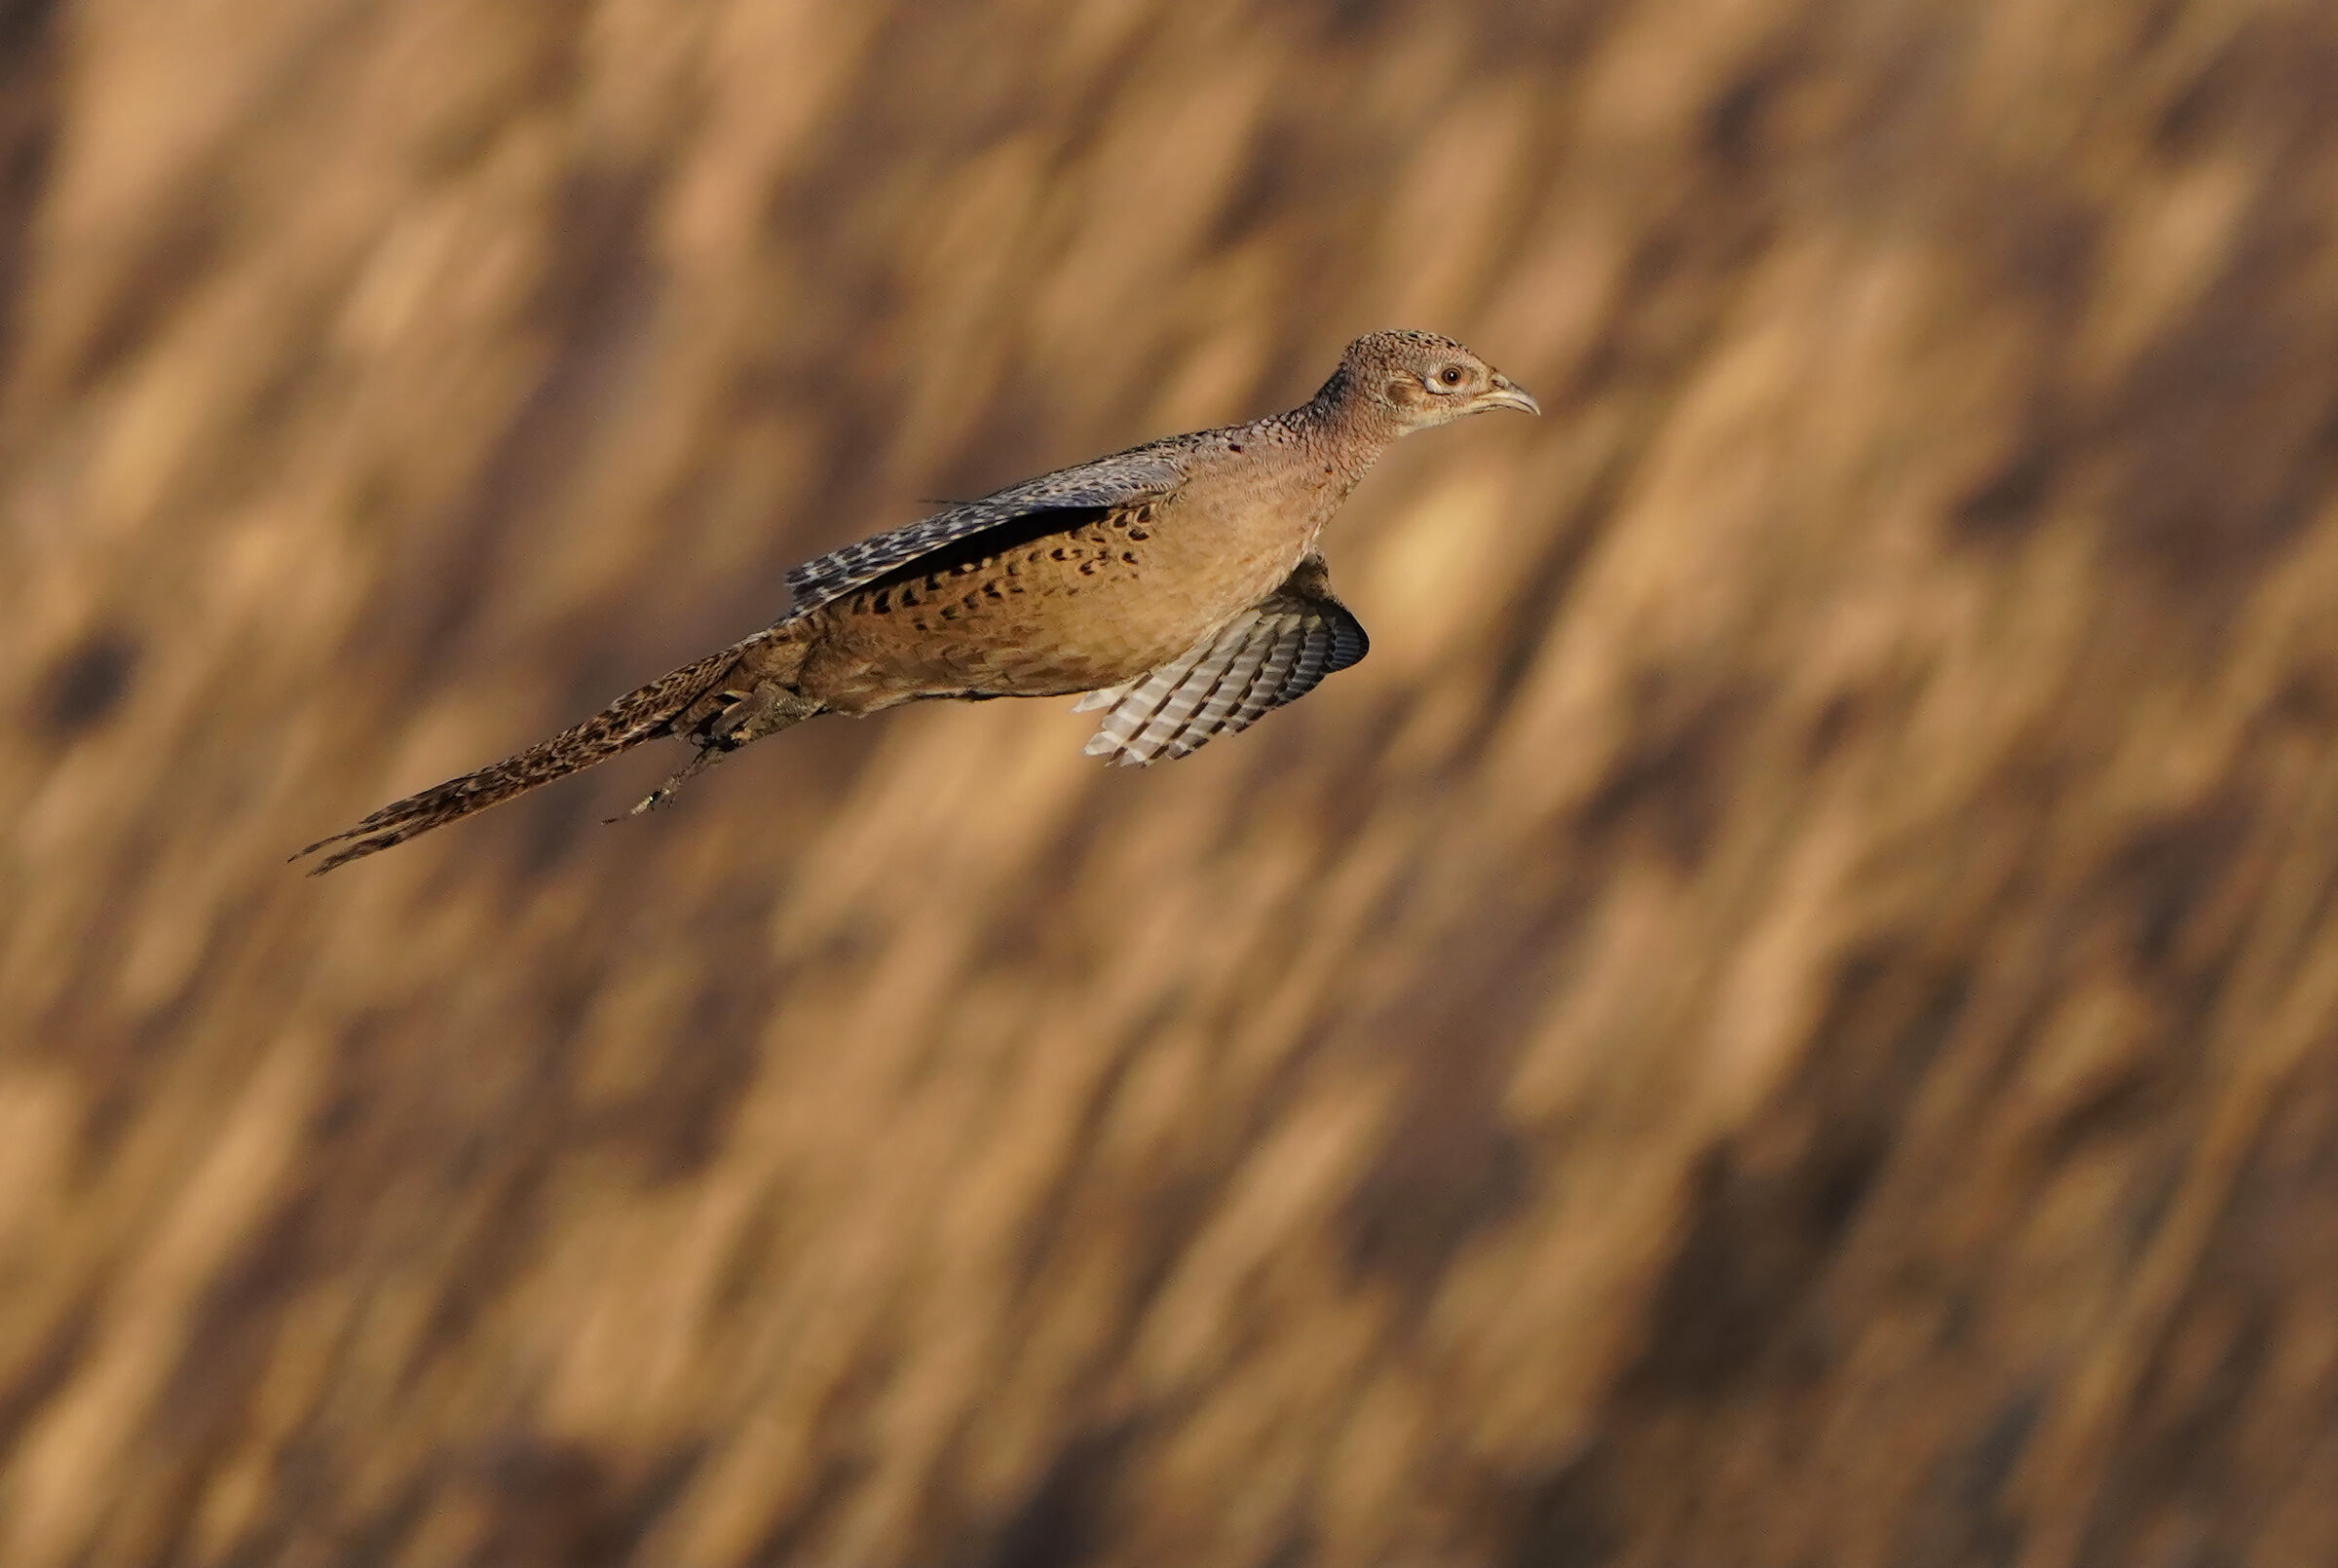 the flight of the pheasant...